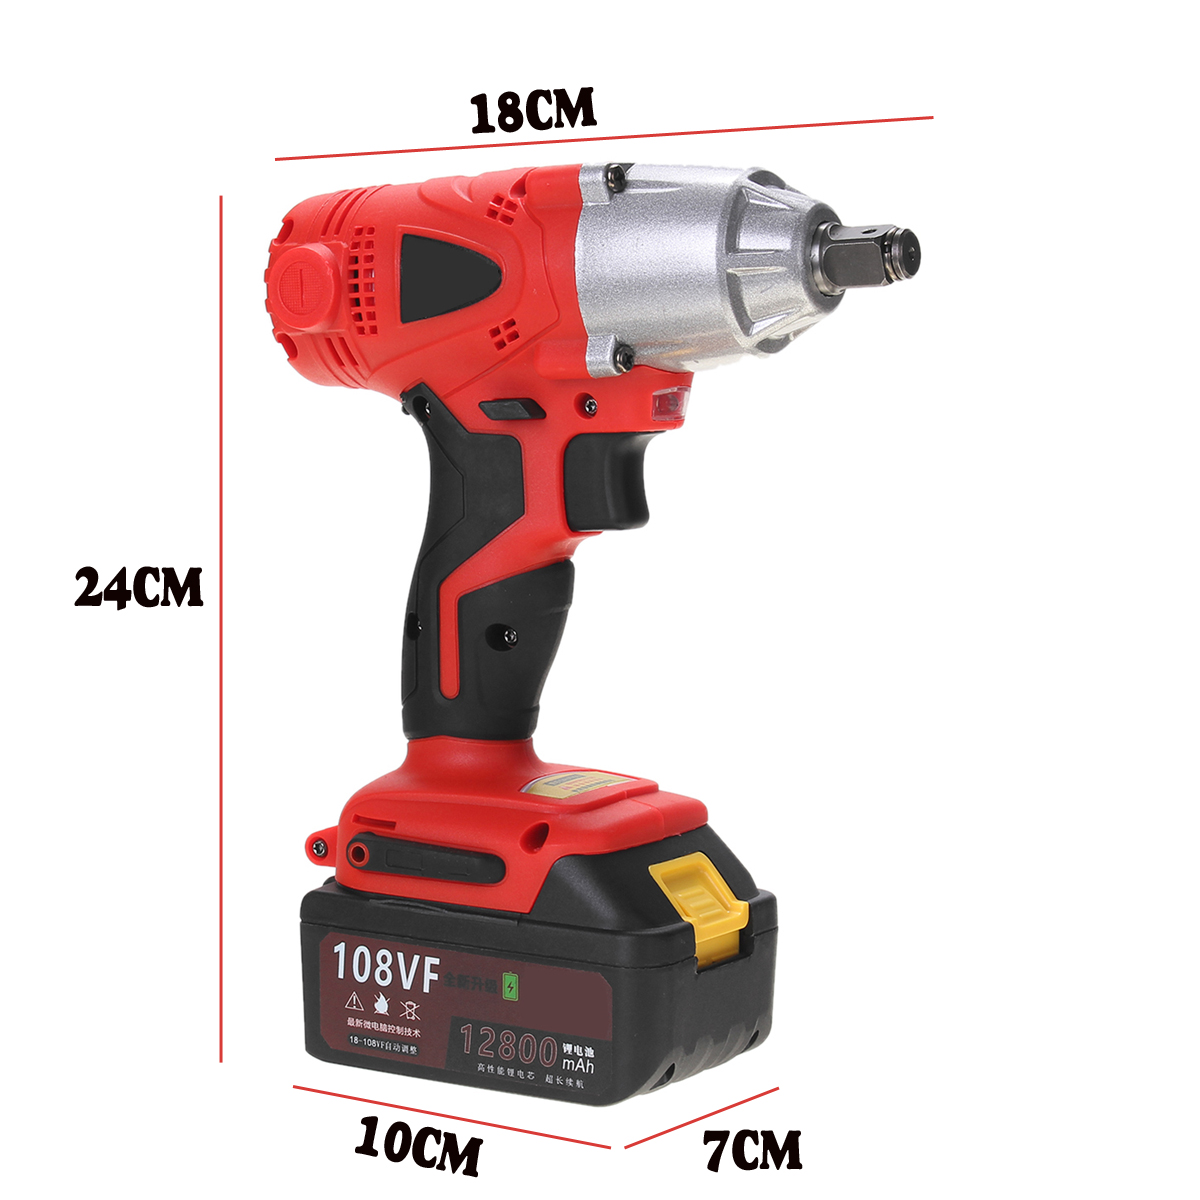 108VF-12800mAh-330Nm-Brushless-Cordless-Electric-Wrench-Impact-Driver-Power-Tool-Rechargeable-Lithiu-1577976-9